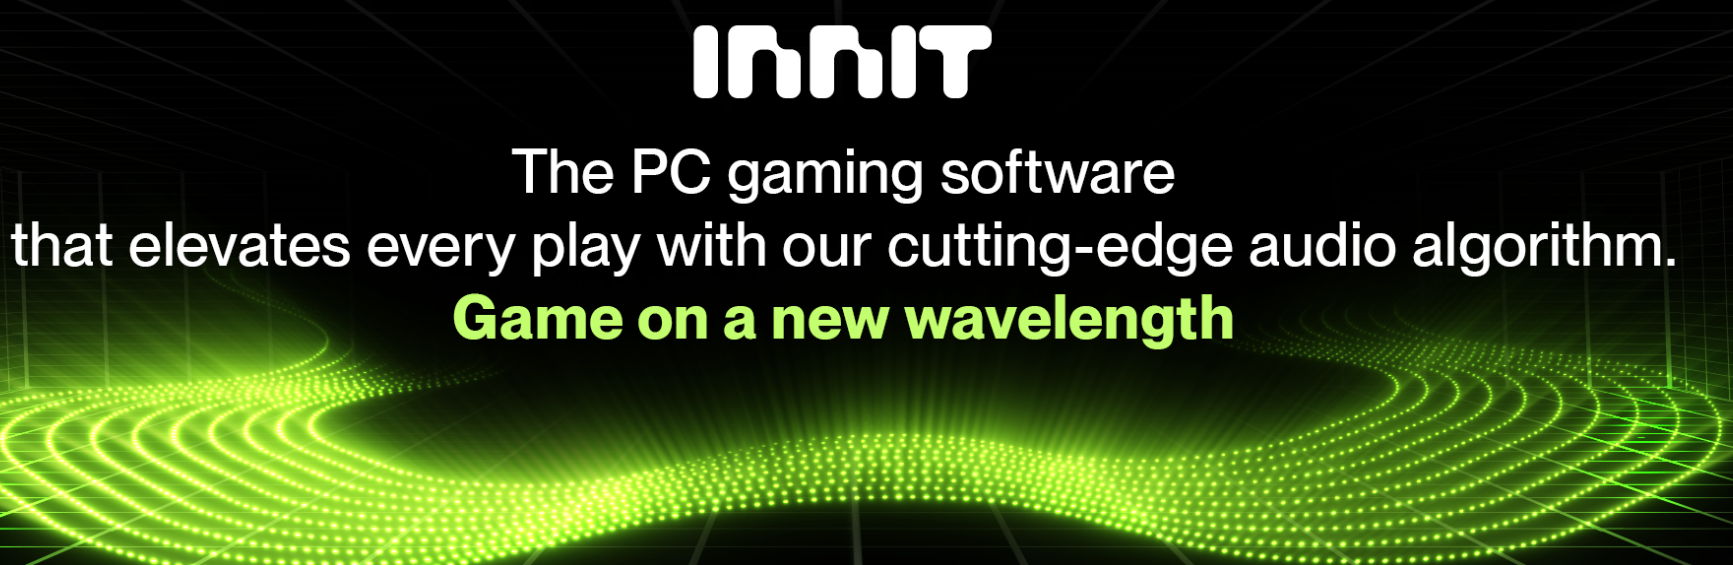 Innit Audio, A New Audio Solution to Enhance your PC Gameplay - techbuzzireland